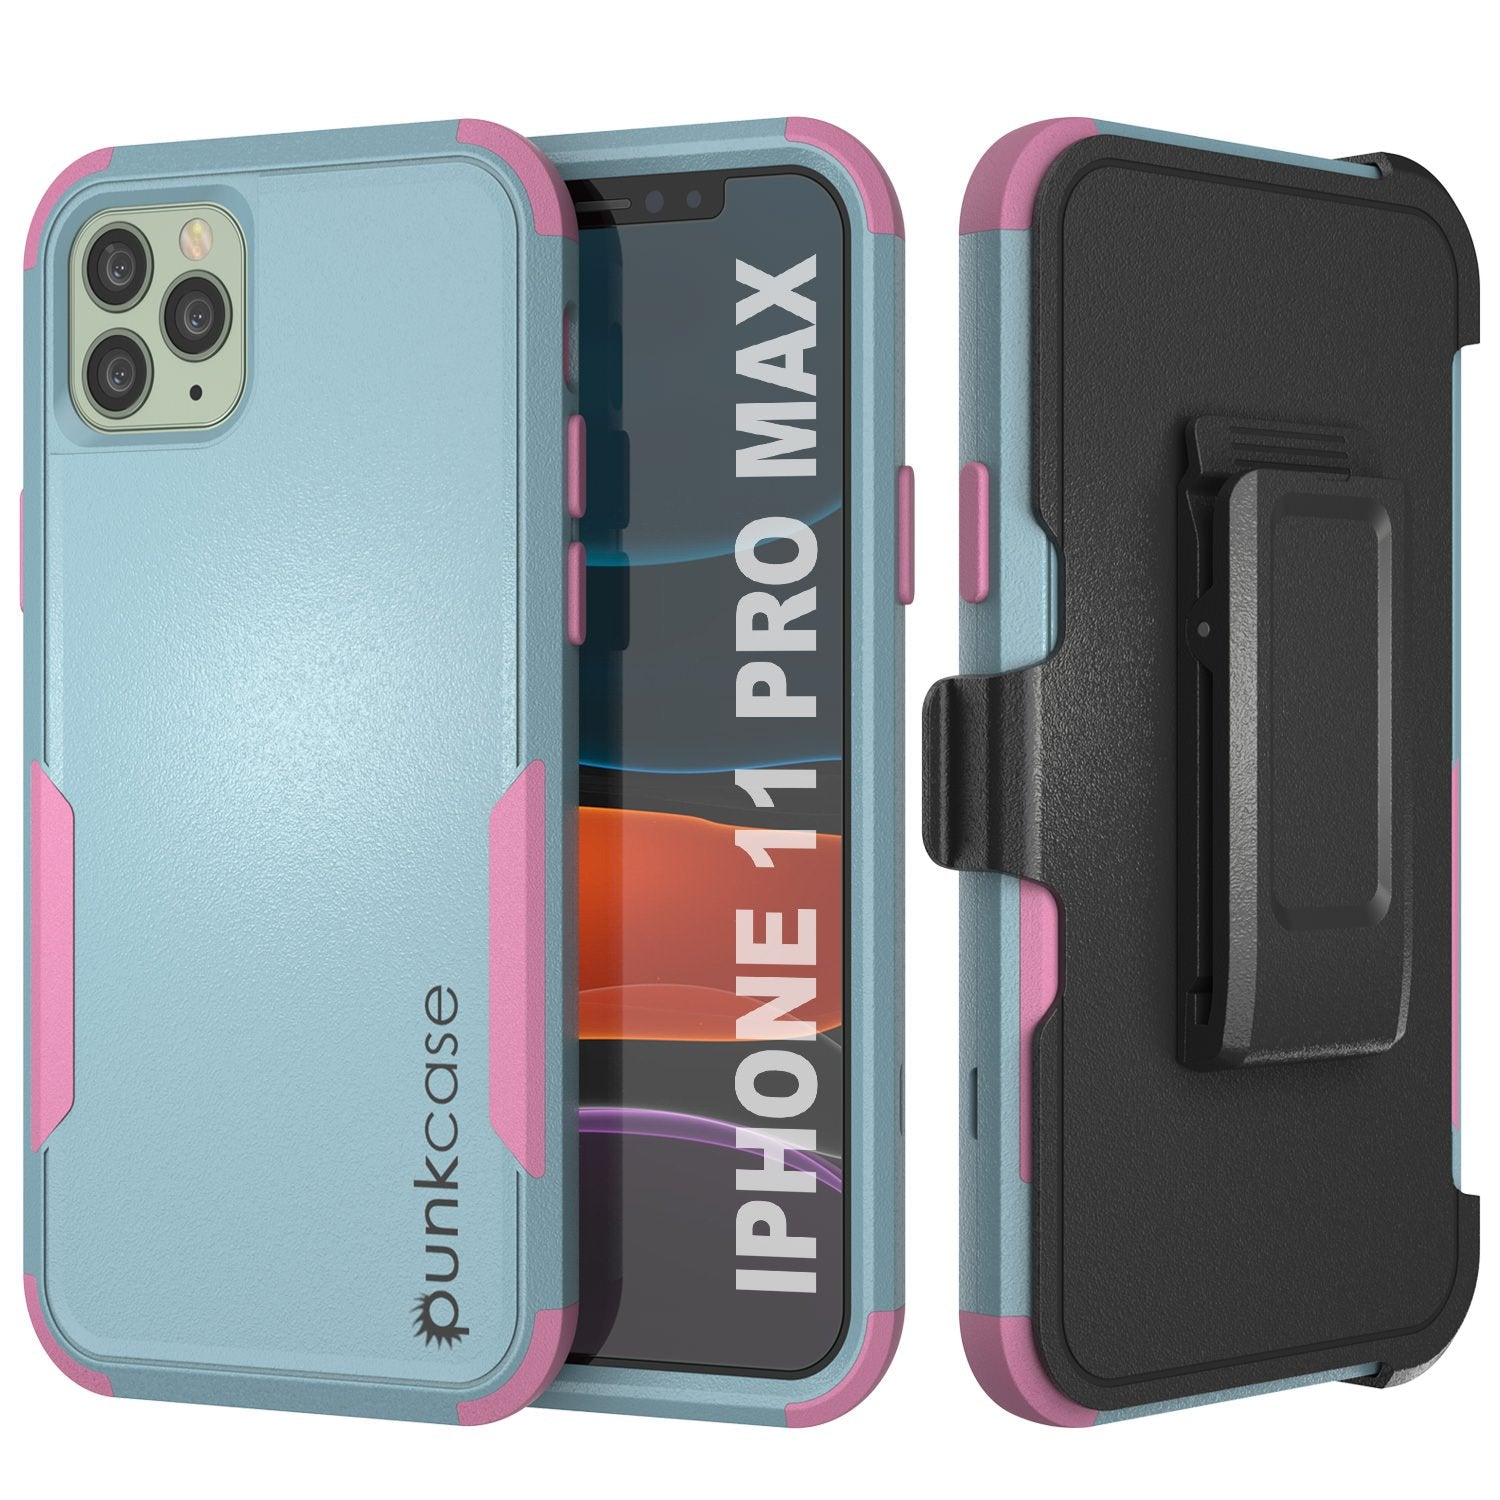 Punkcase for iPhone 11 Pro Max Belt Clip Multilayer Holster Case [Patron Series] [Mint-Pink] (Color in image: Mint-Pink)